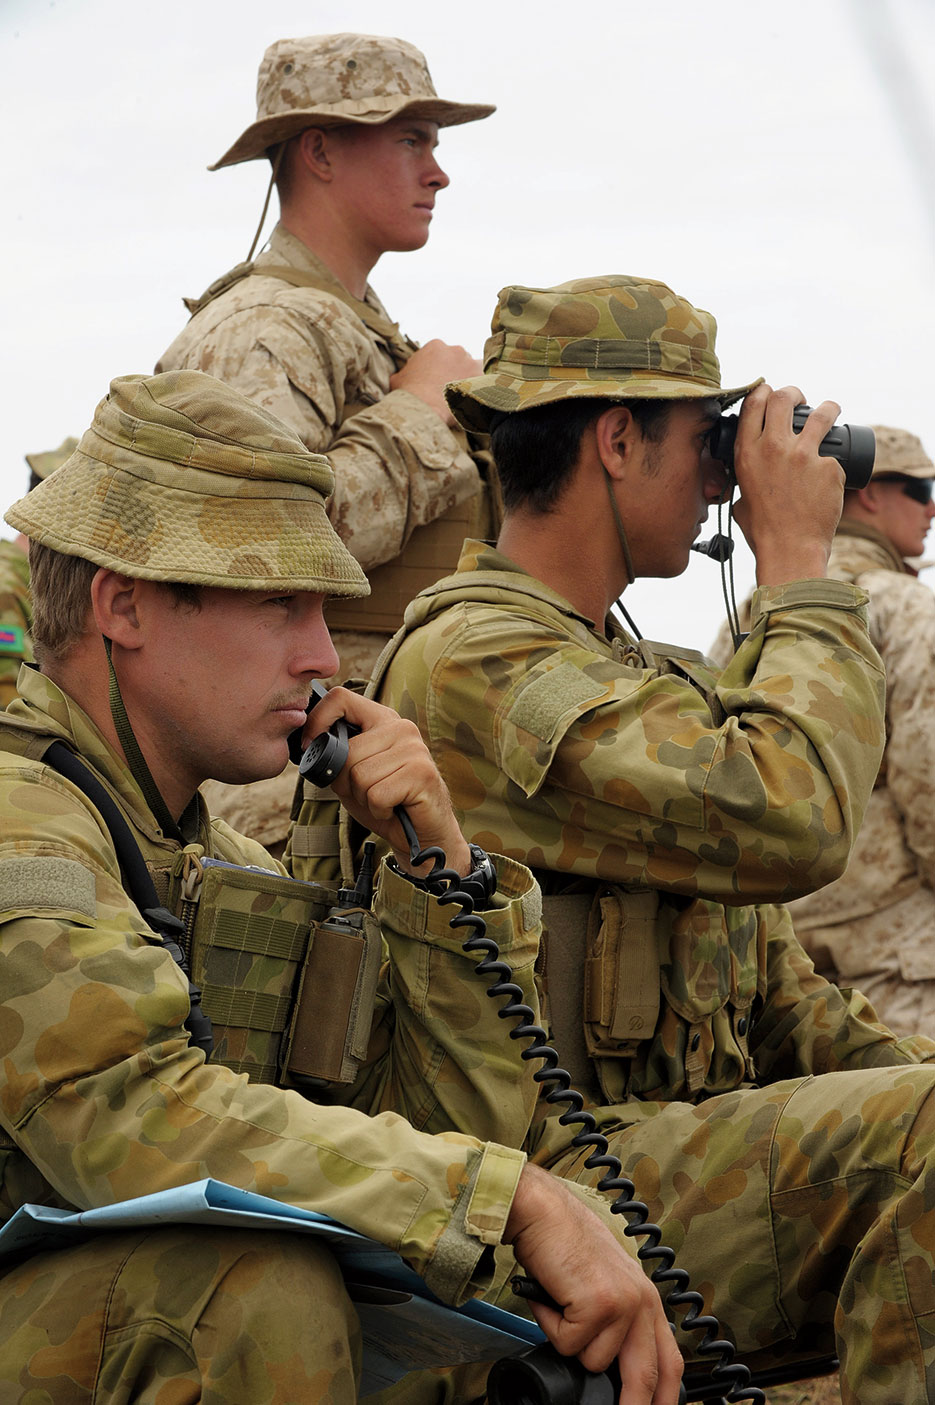 Australian Army Lieutenant and Gunner from 8/12 Regiment coordinate fire support as U.S. Marine from 2nd Battalion, 7th Marine Regiment looks on during Combined Joint Live Fire Exercise on Townshend Island during Talisman Sabre 2011 (Australian Army/Janine Fabre)